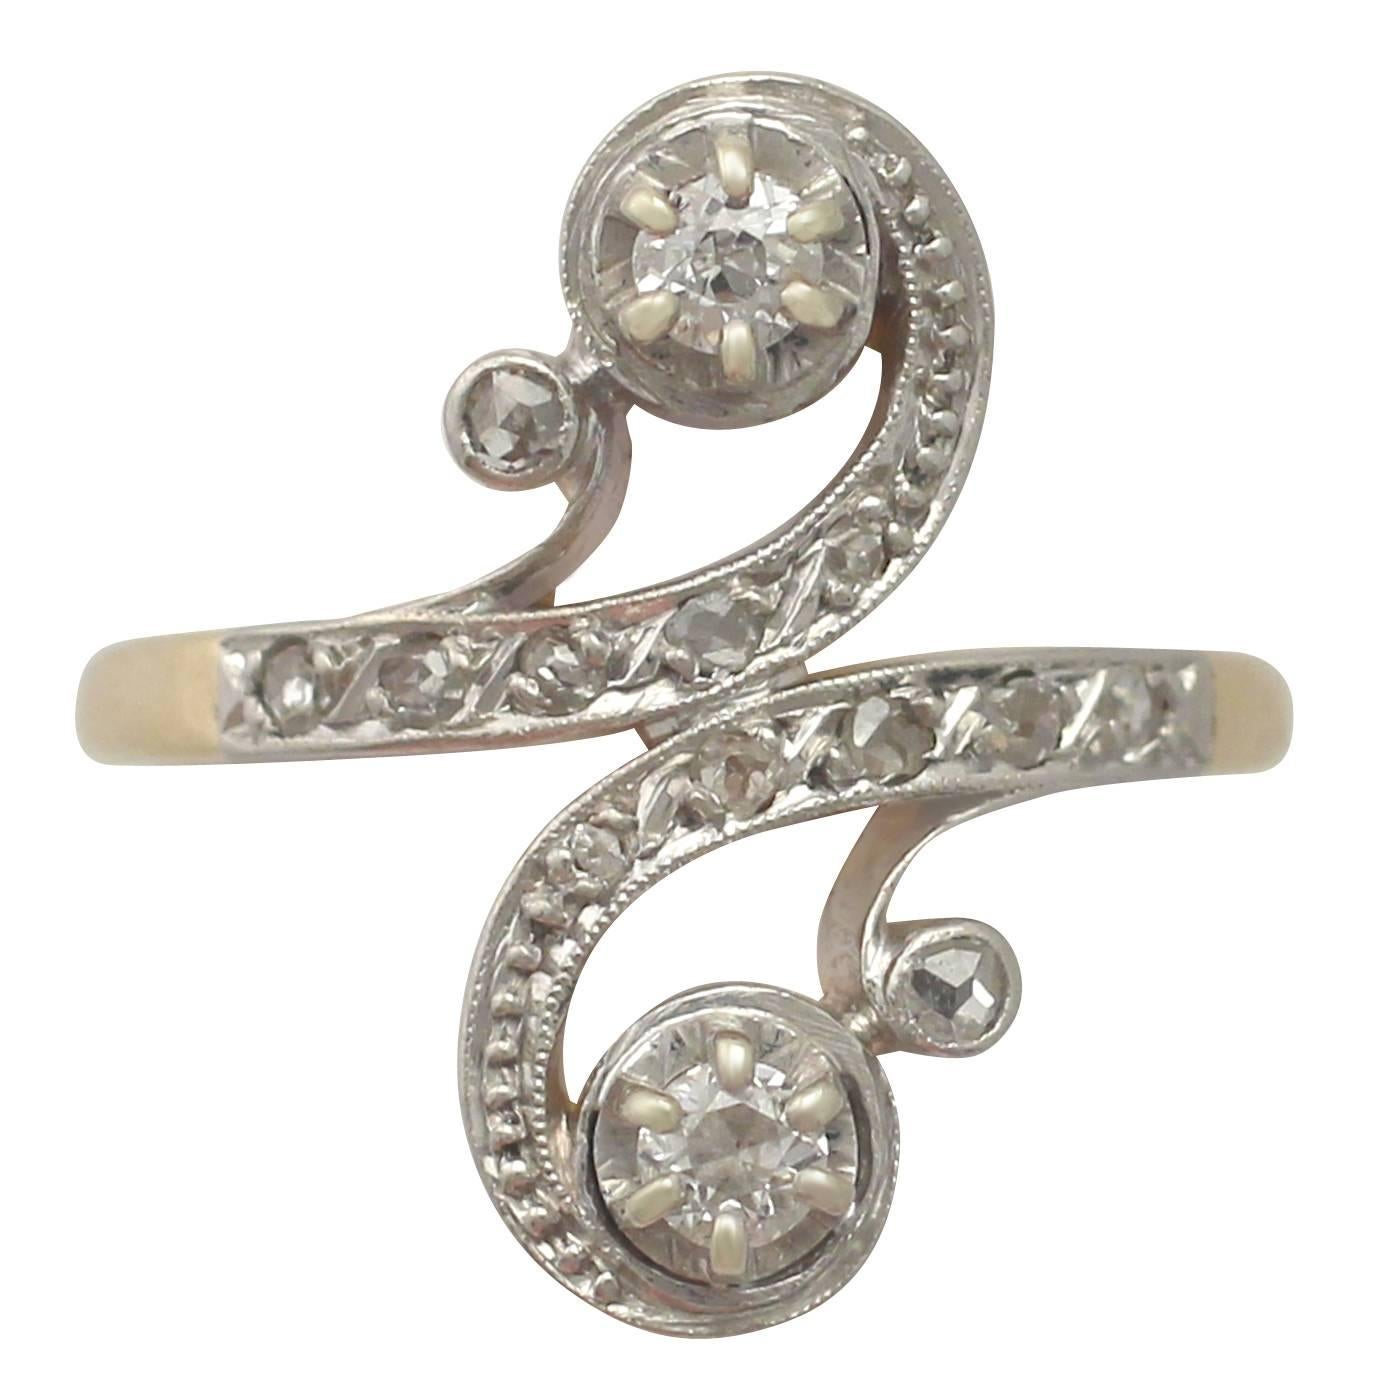 1920s French 0.43 Carat Diamond and Yellow Gold Twist Ring